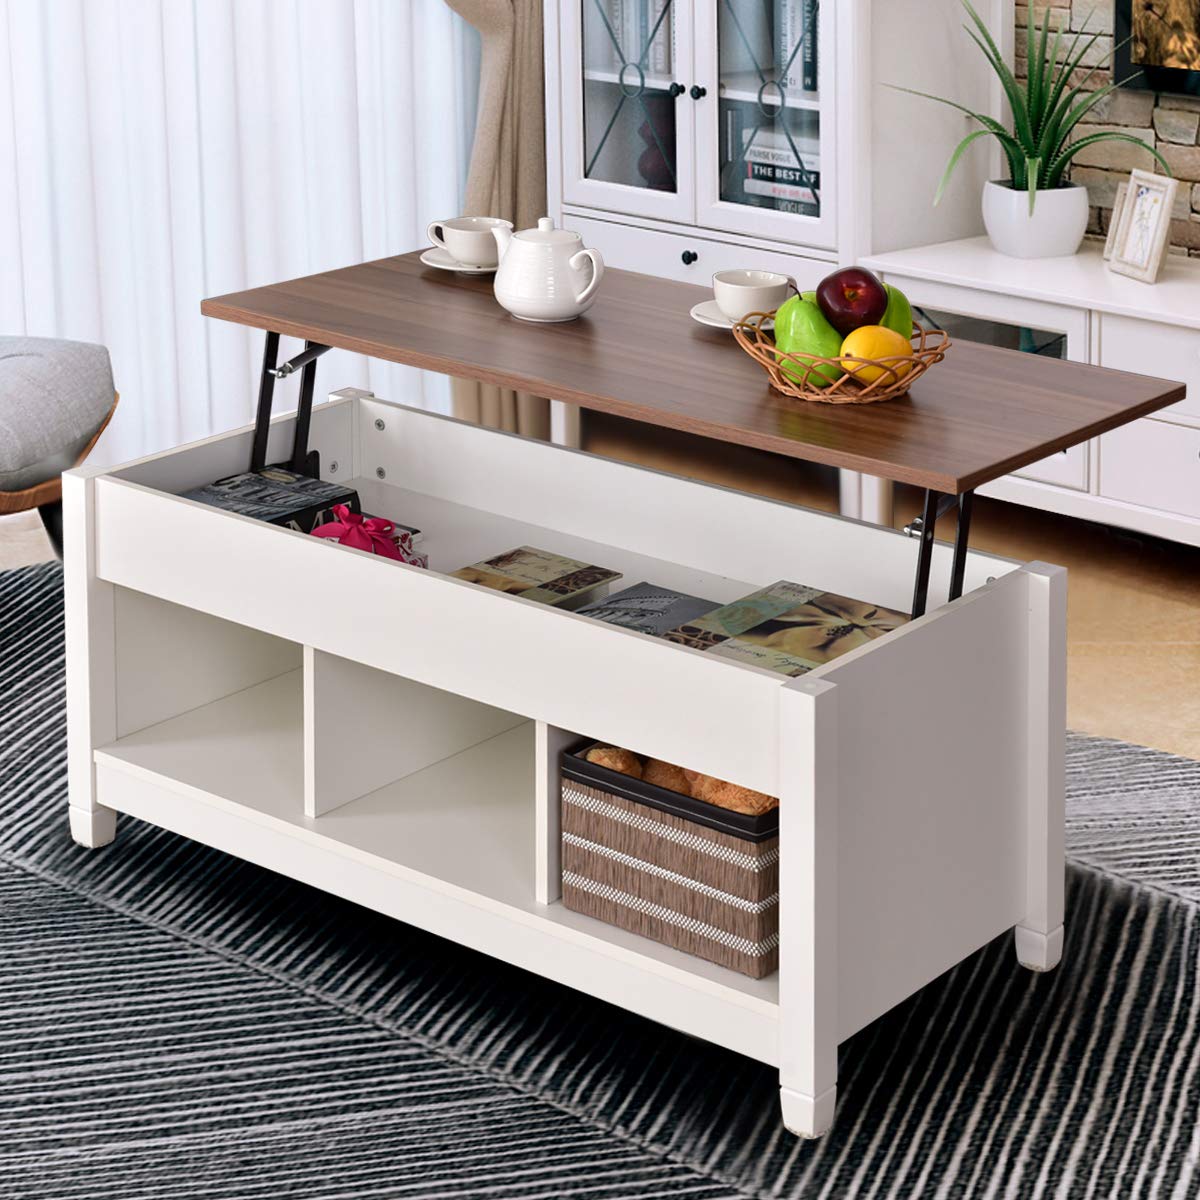 Tangkula Coffee Table Lift Top Wood Home Living Room Modern Lift Top Storage Coffee Table w/Hidden Compartment Lift Tabletop Furniture (White)